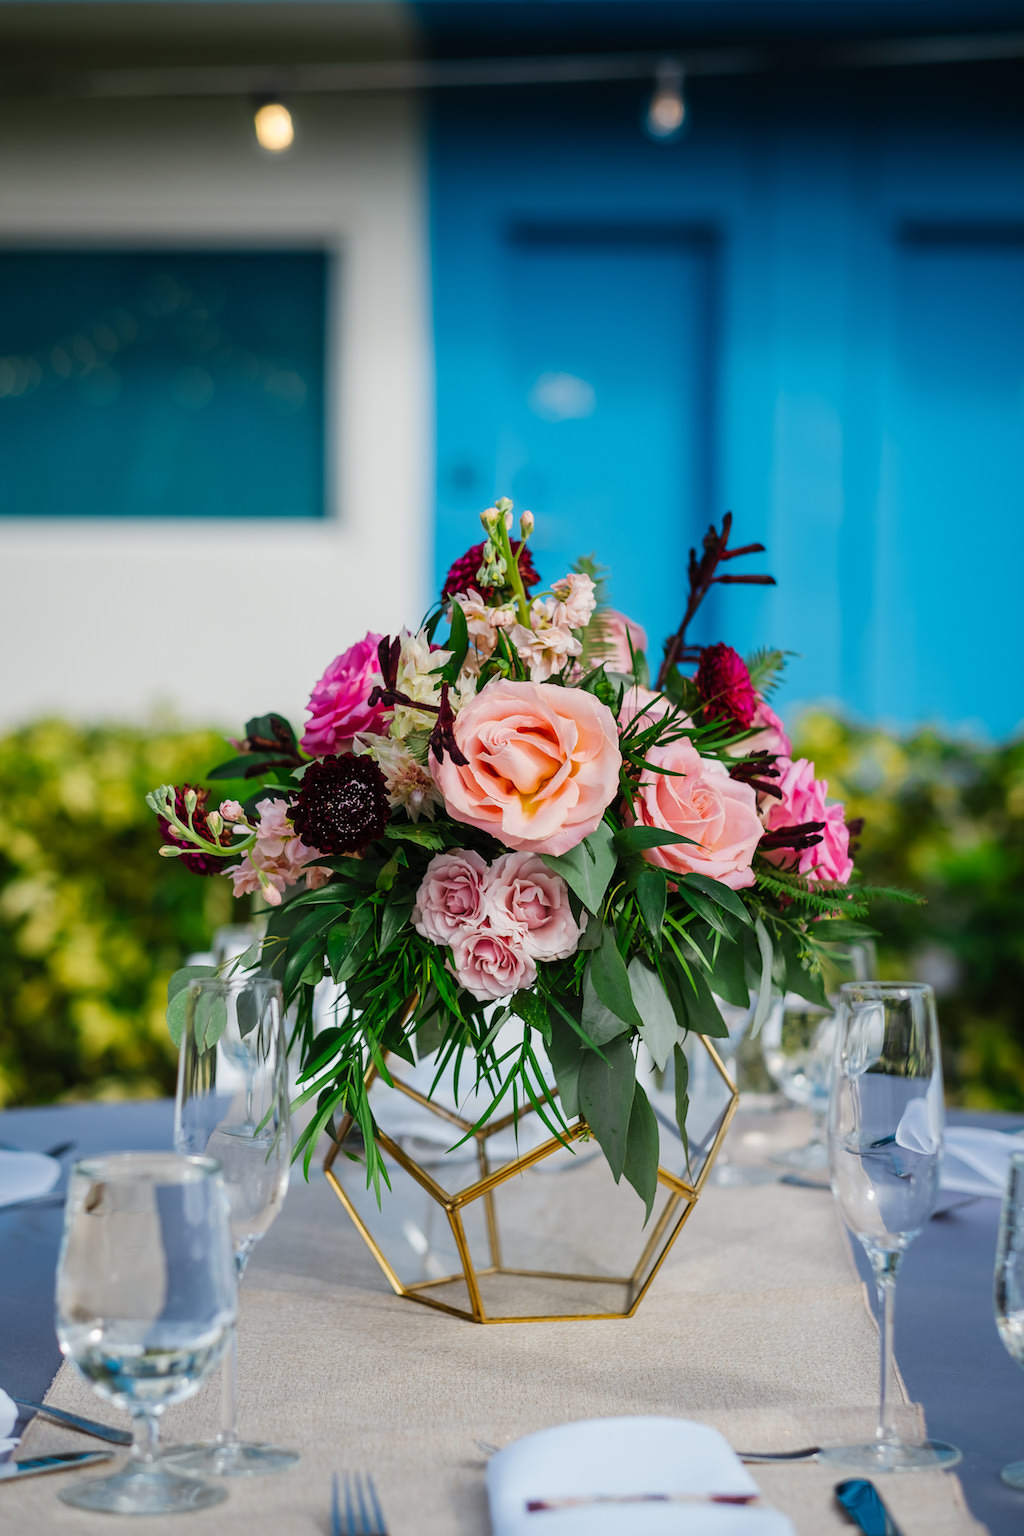 Tropical Elegant Wedding Reception Decor, Gold and Clear Glass Geometric Vase with Pink and Blush Roses, Greenery and Dark Purple Floral Centerpiece